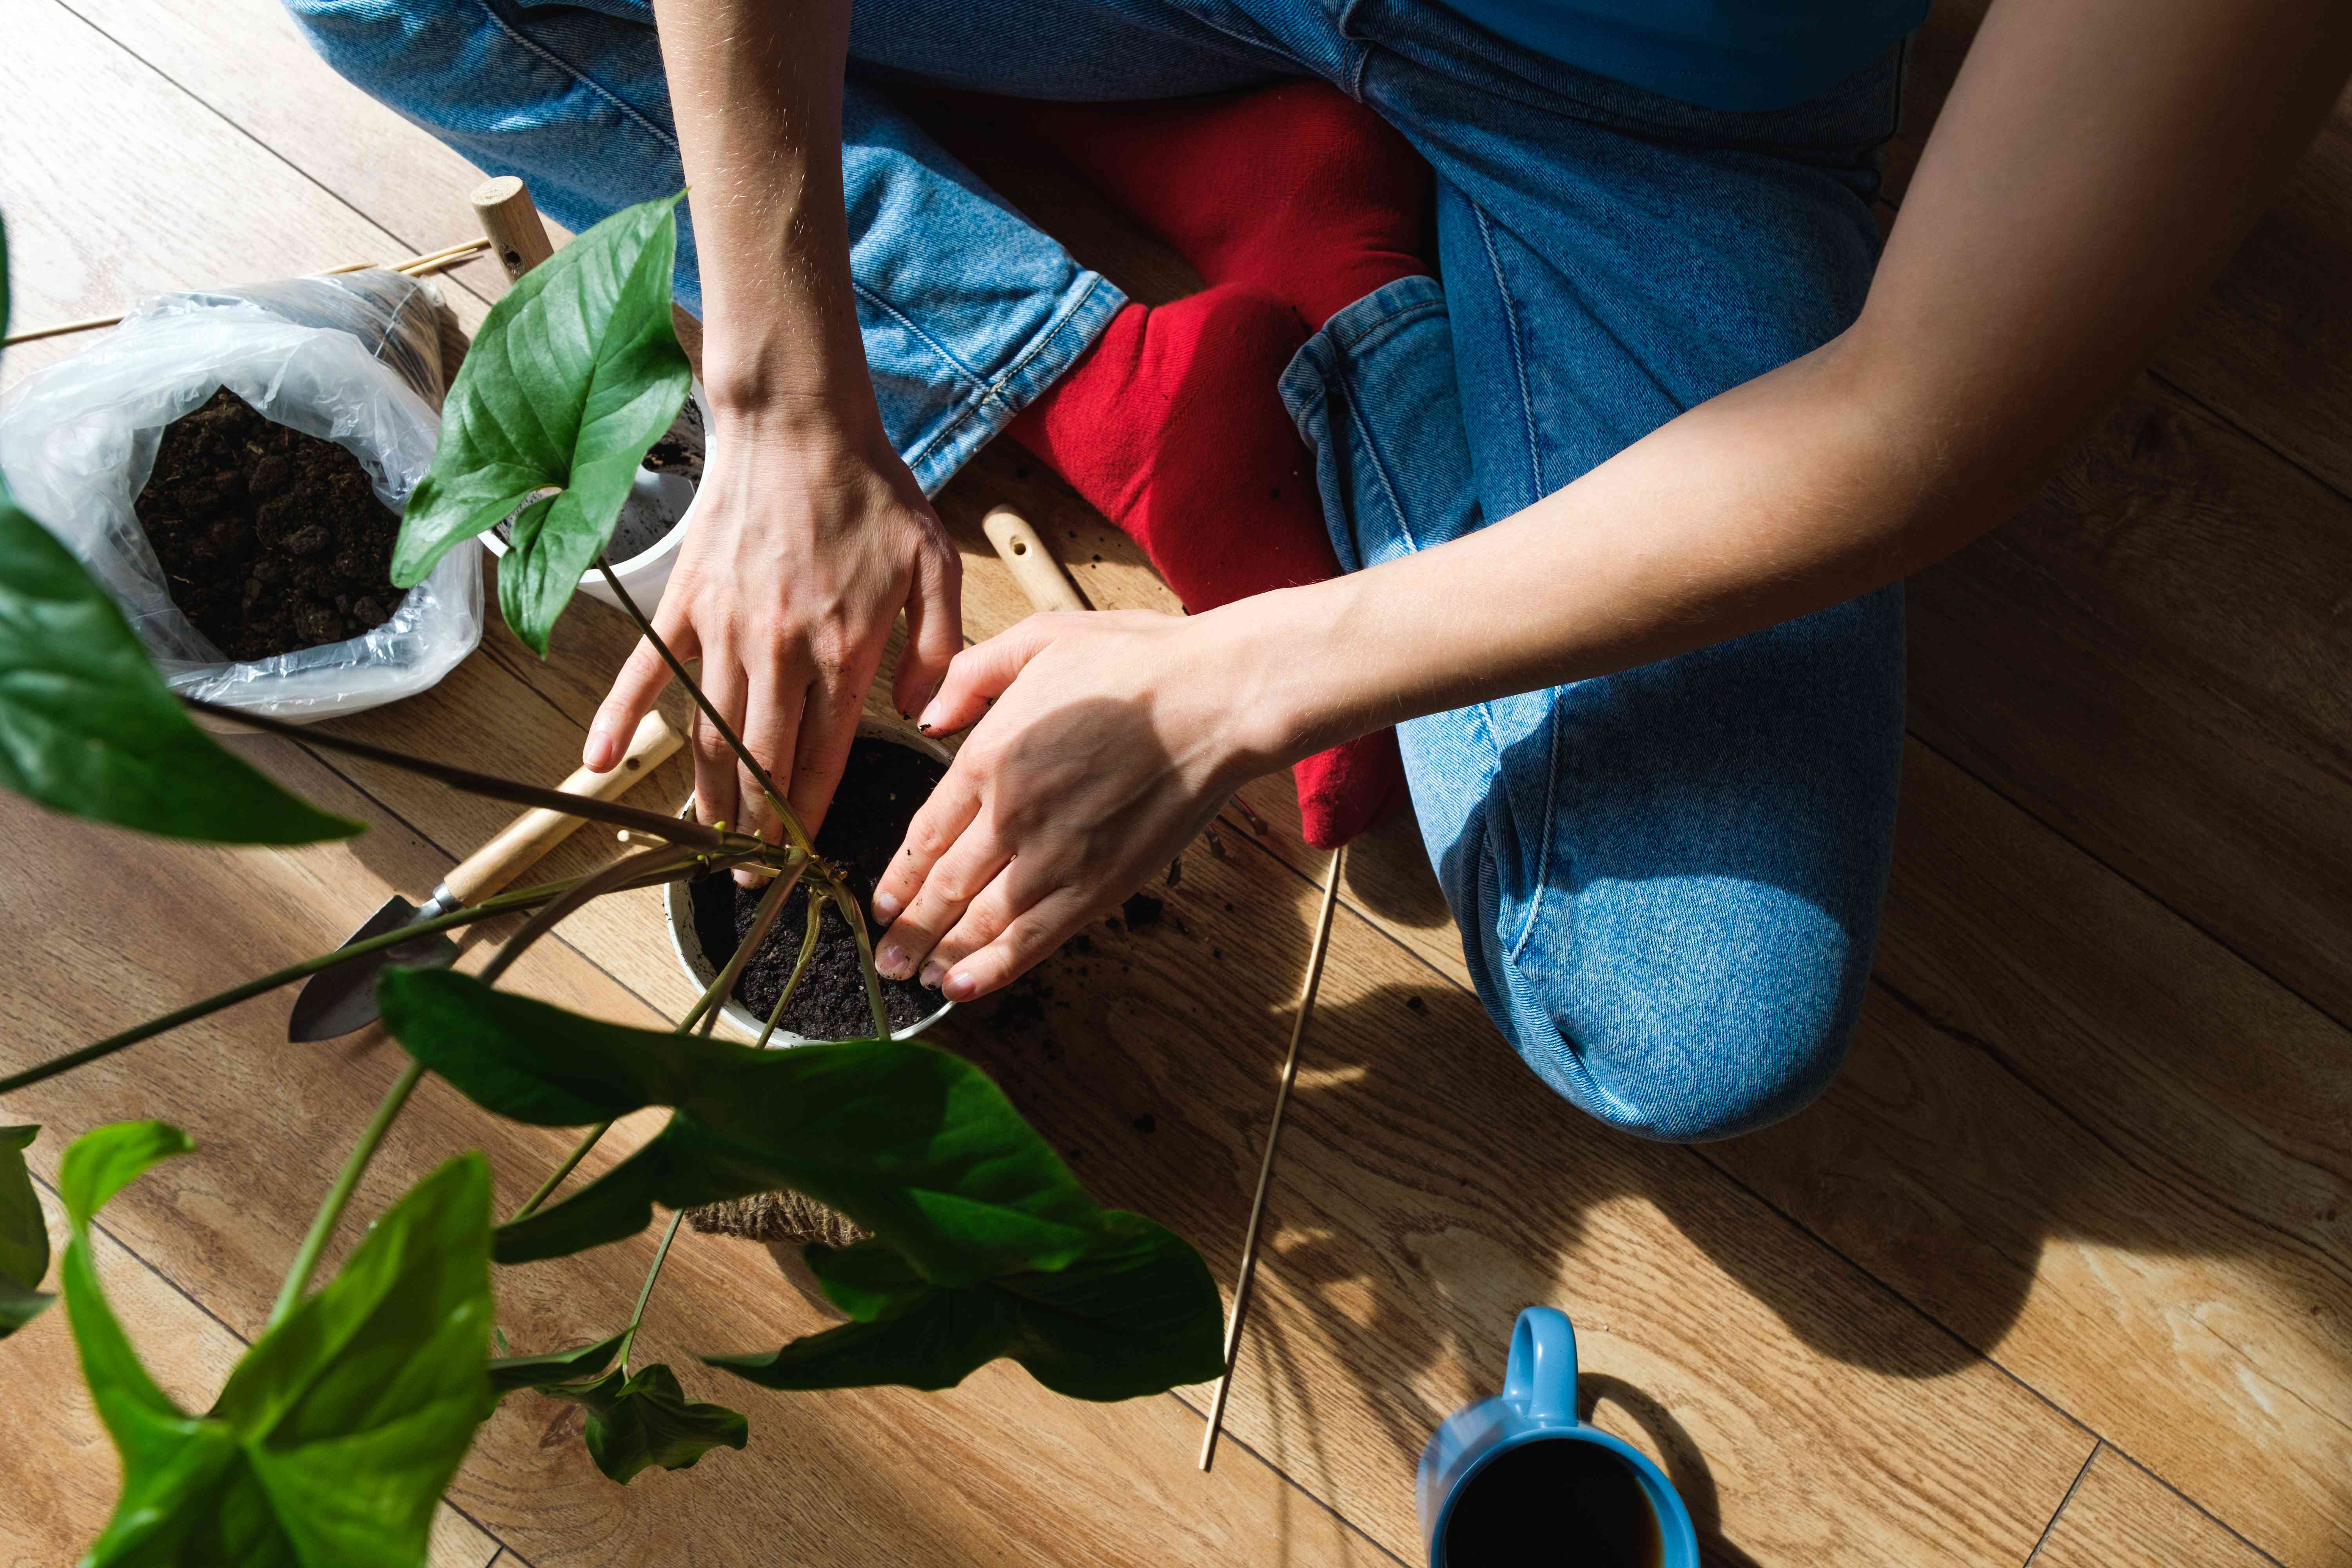 Planting of home green plants and flowers indoors, against the background of a wooden floor. The hands of a young woman plant a beautiful indoor flower in a flower pot. The concept of a home garden, hobby, gardening. Environmental protection.